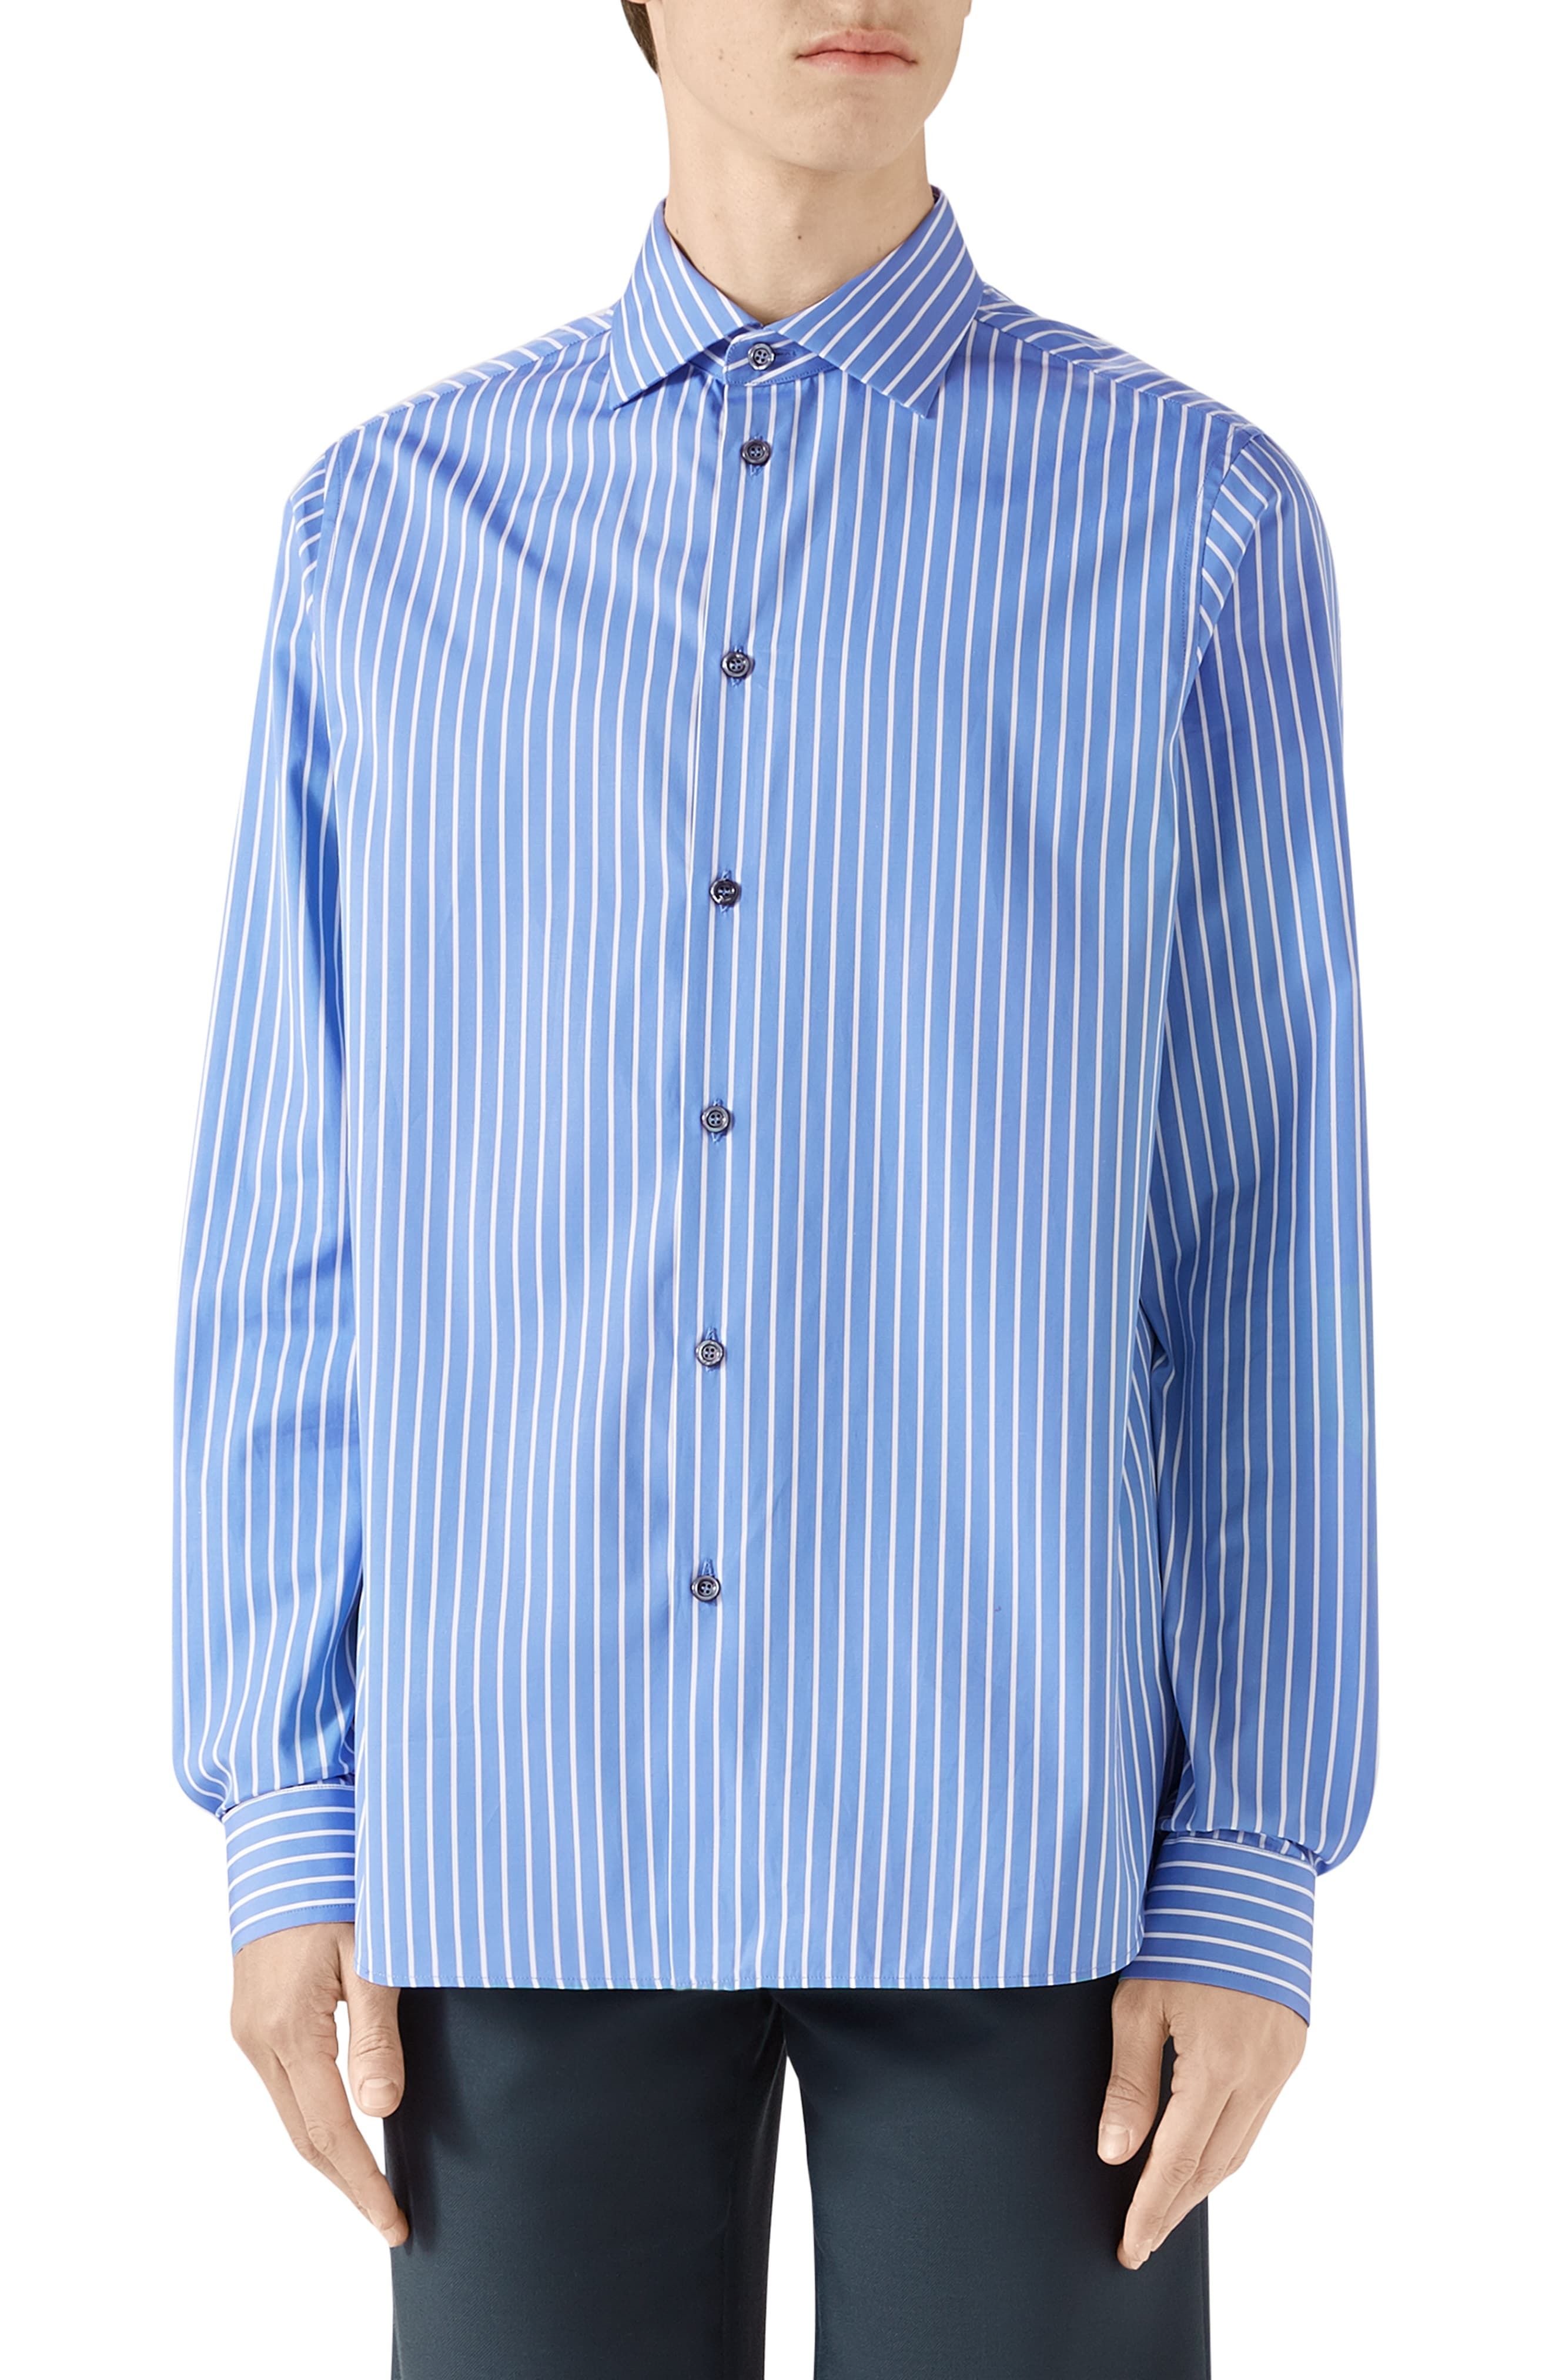 Gucci Stripe Button Up Shirt, $780 | Nordstrom | Lookastic